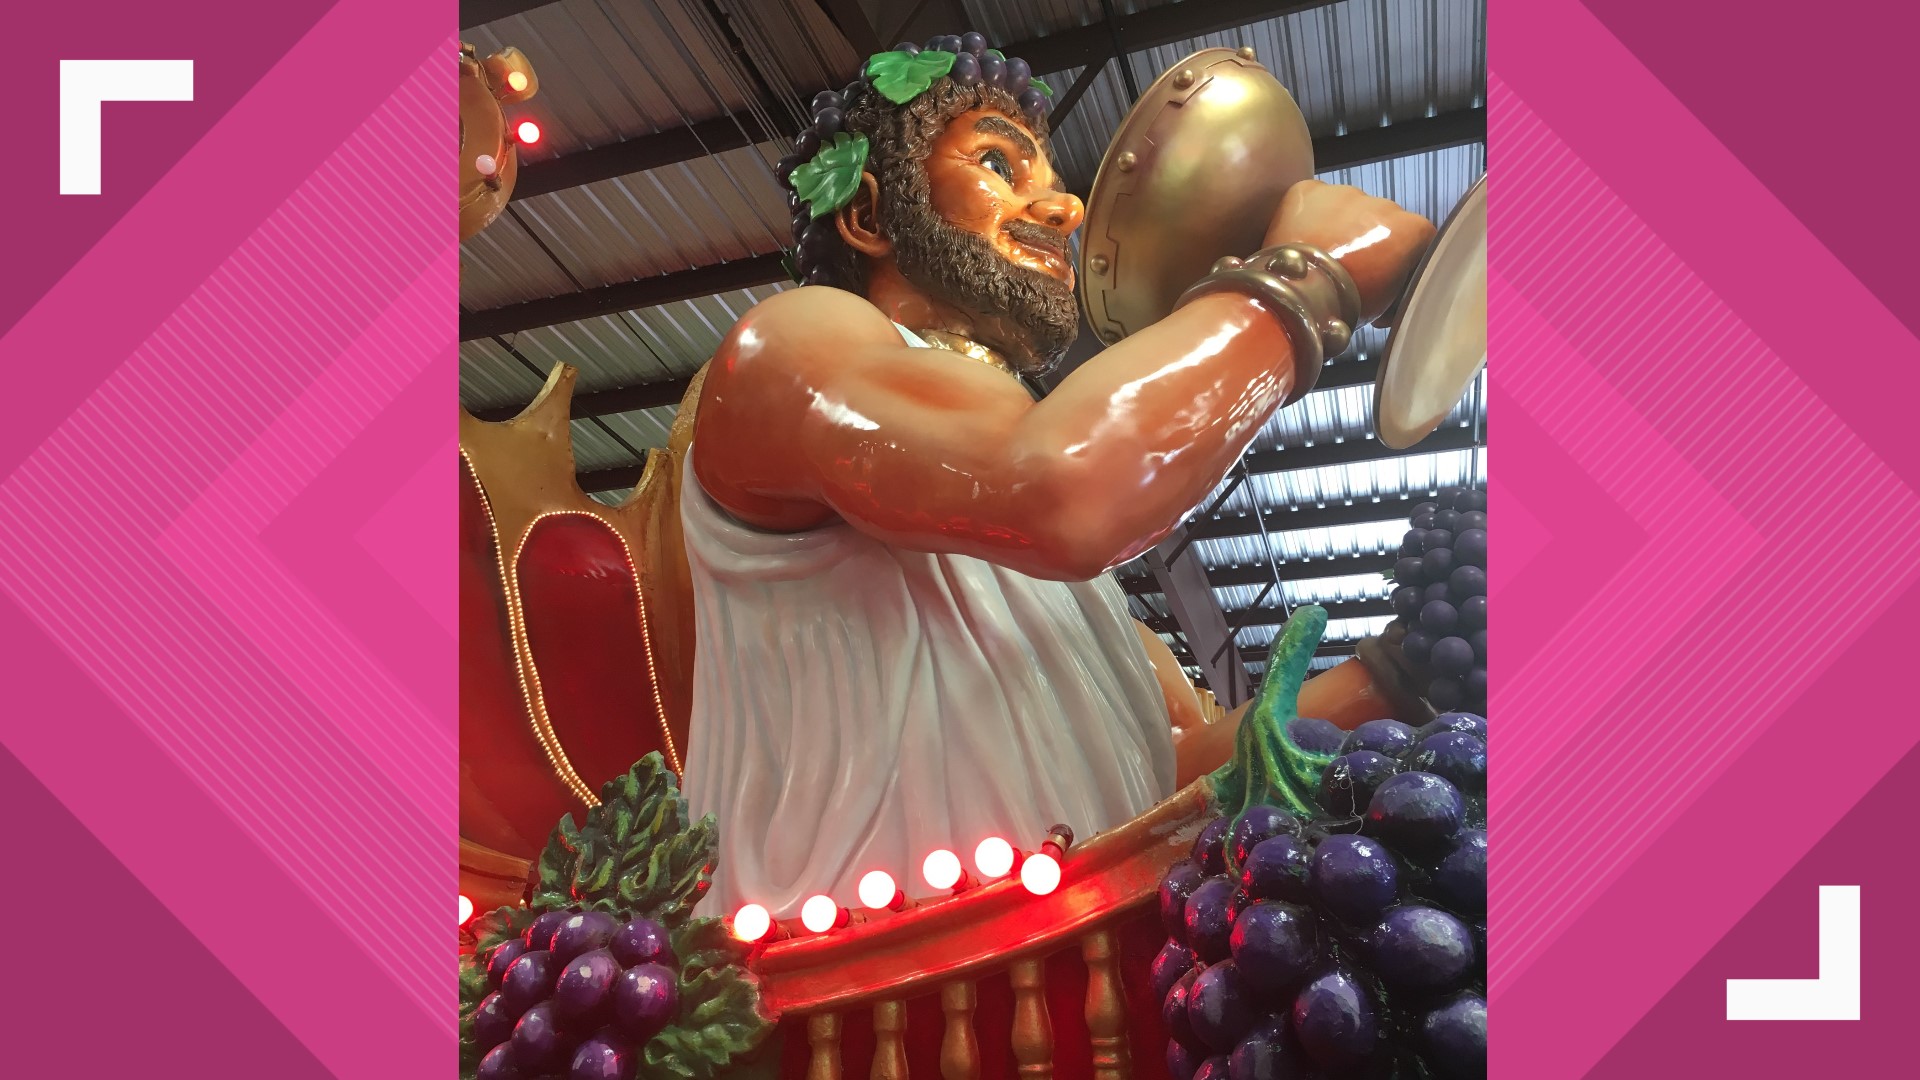 Bacchus to unveil new animated king & officers' floats in this year's